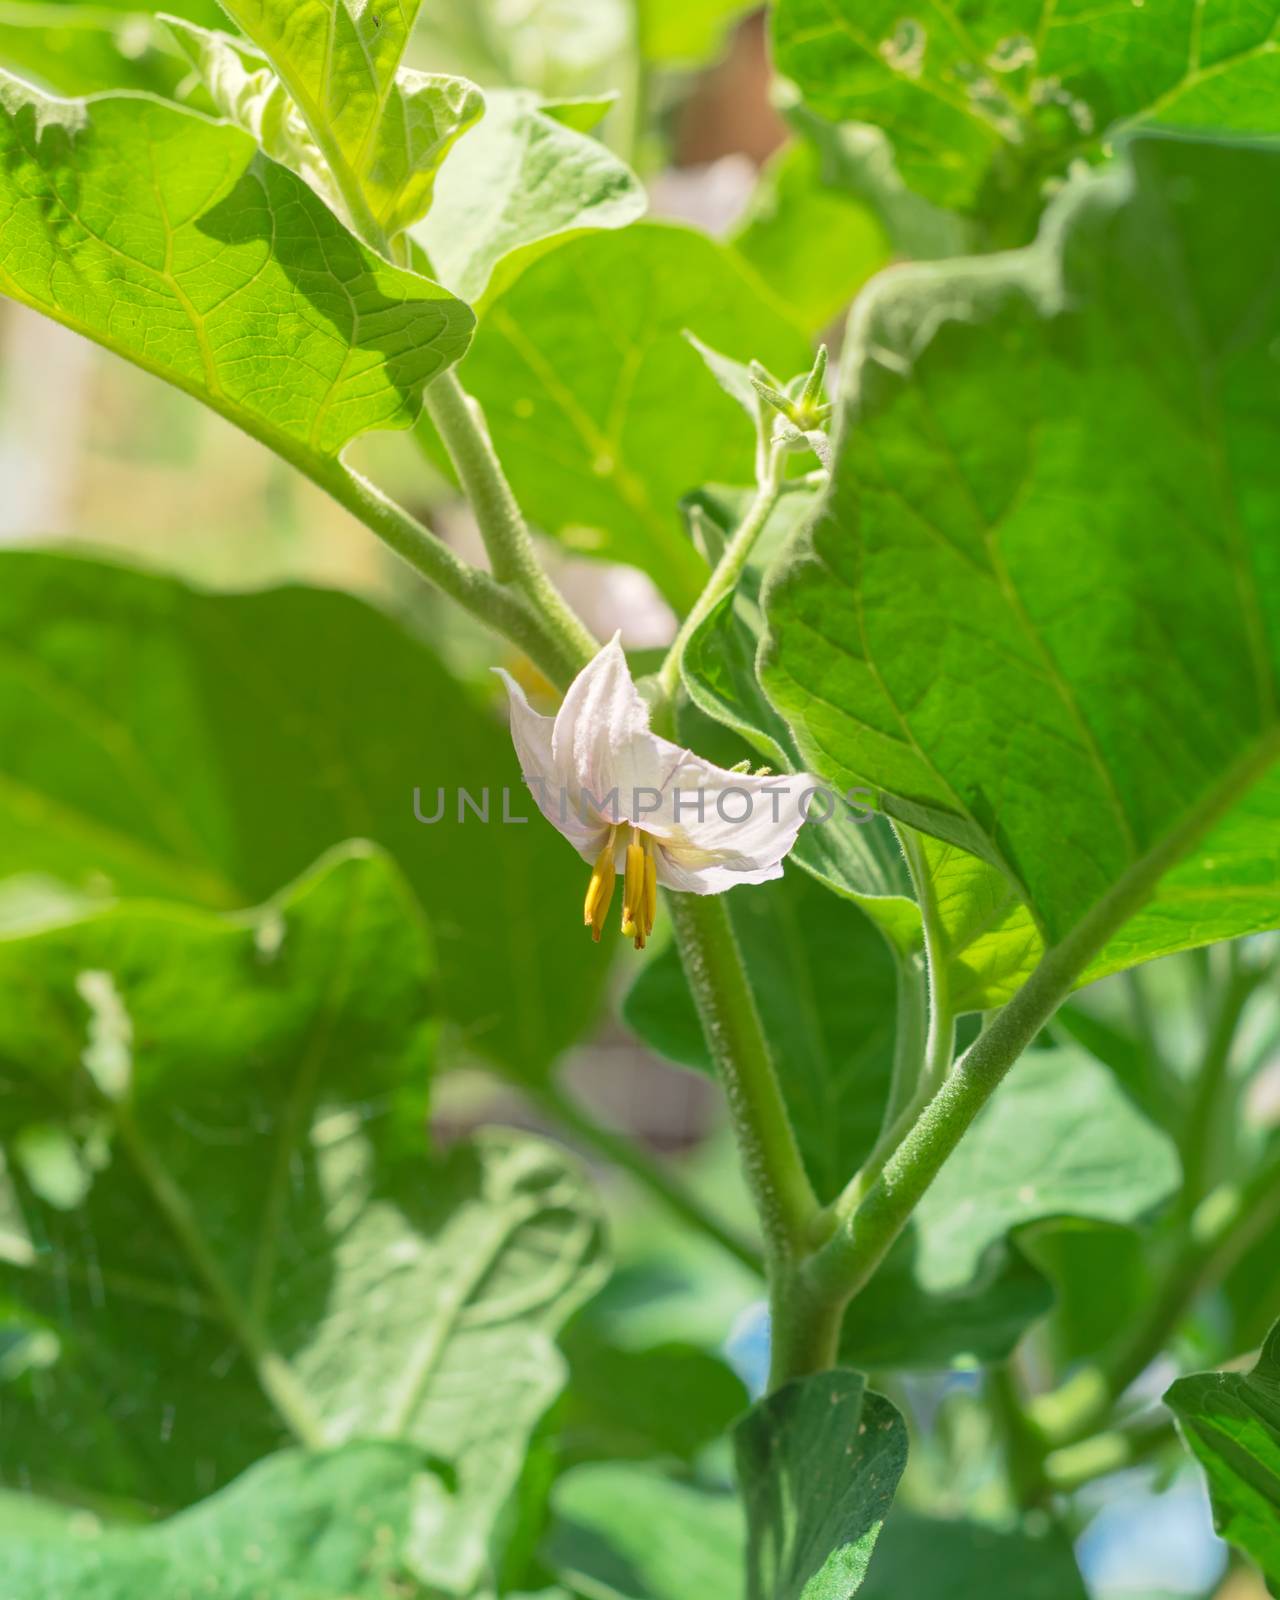 Blossom purple eggplant flowers at homegrown garden near Dallas, Texas, USA by trongnguyen